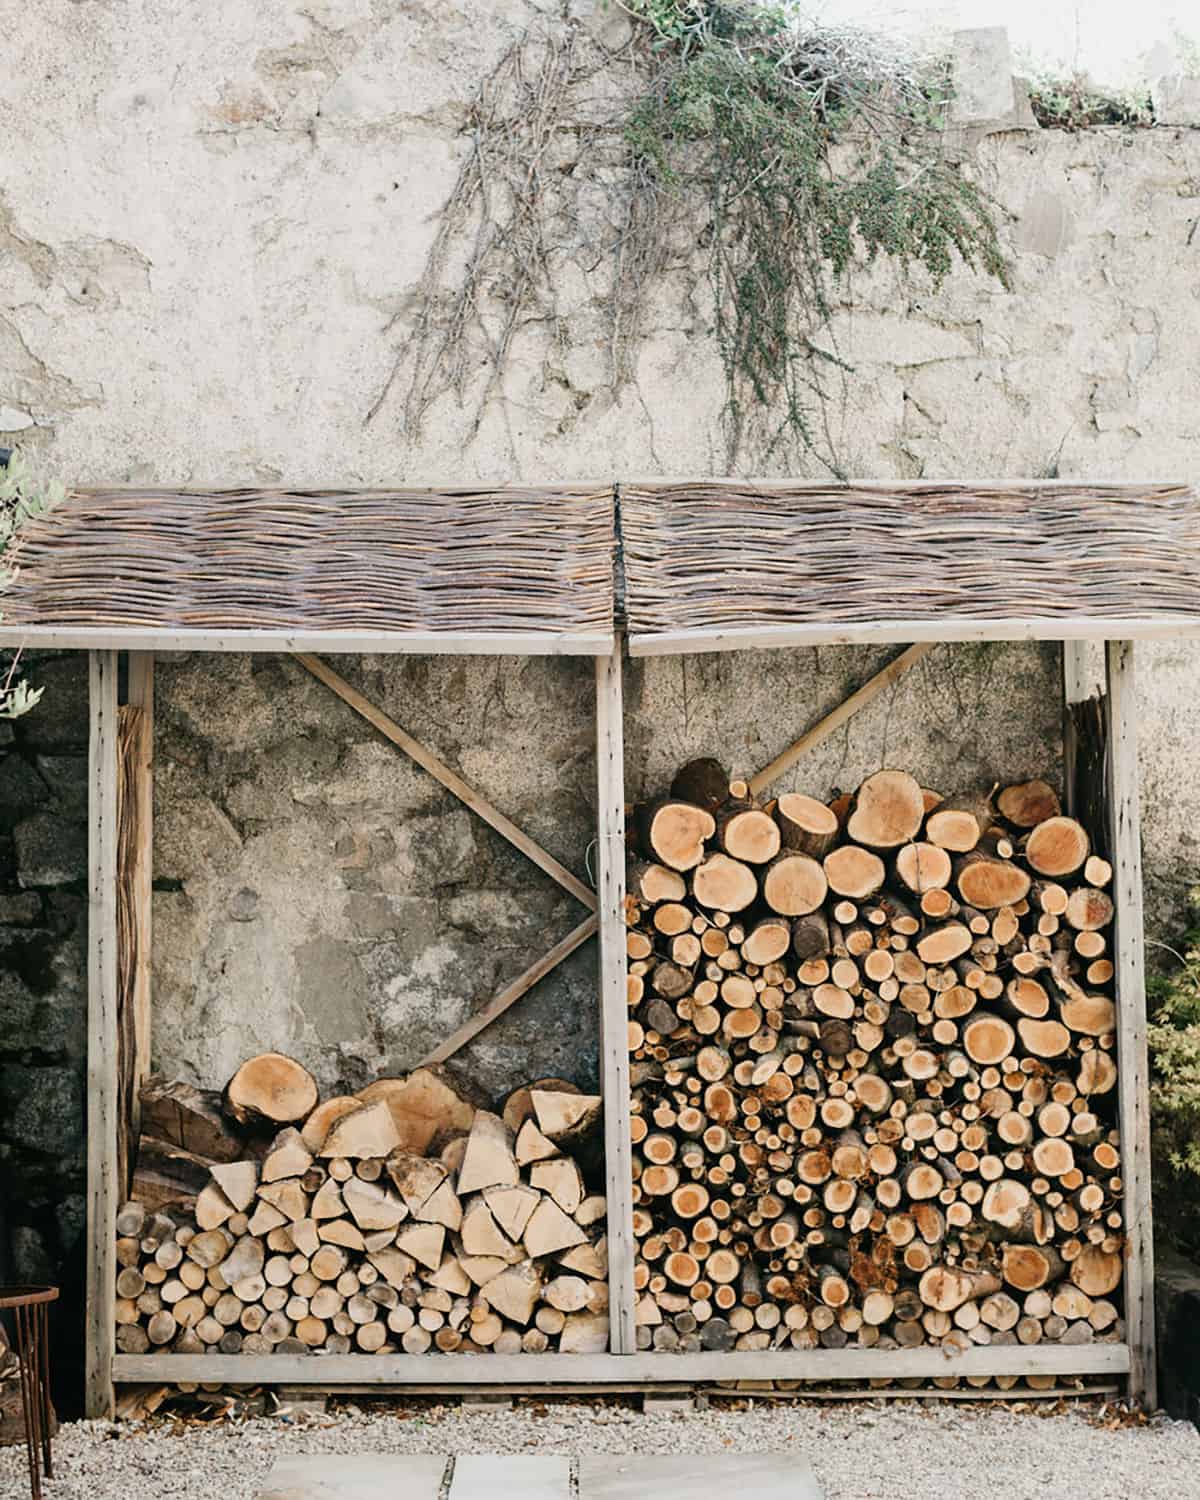 cut wood stacked on the side of the house, outside.